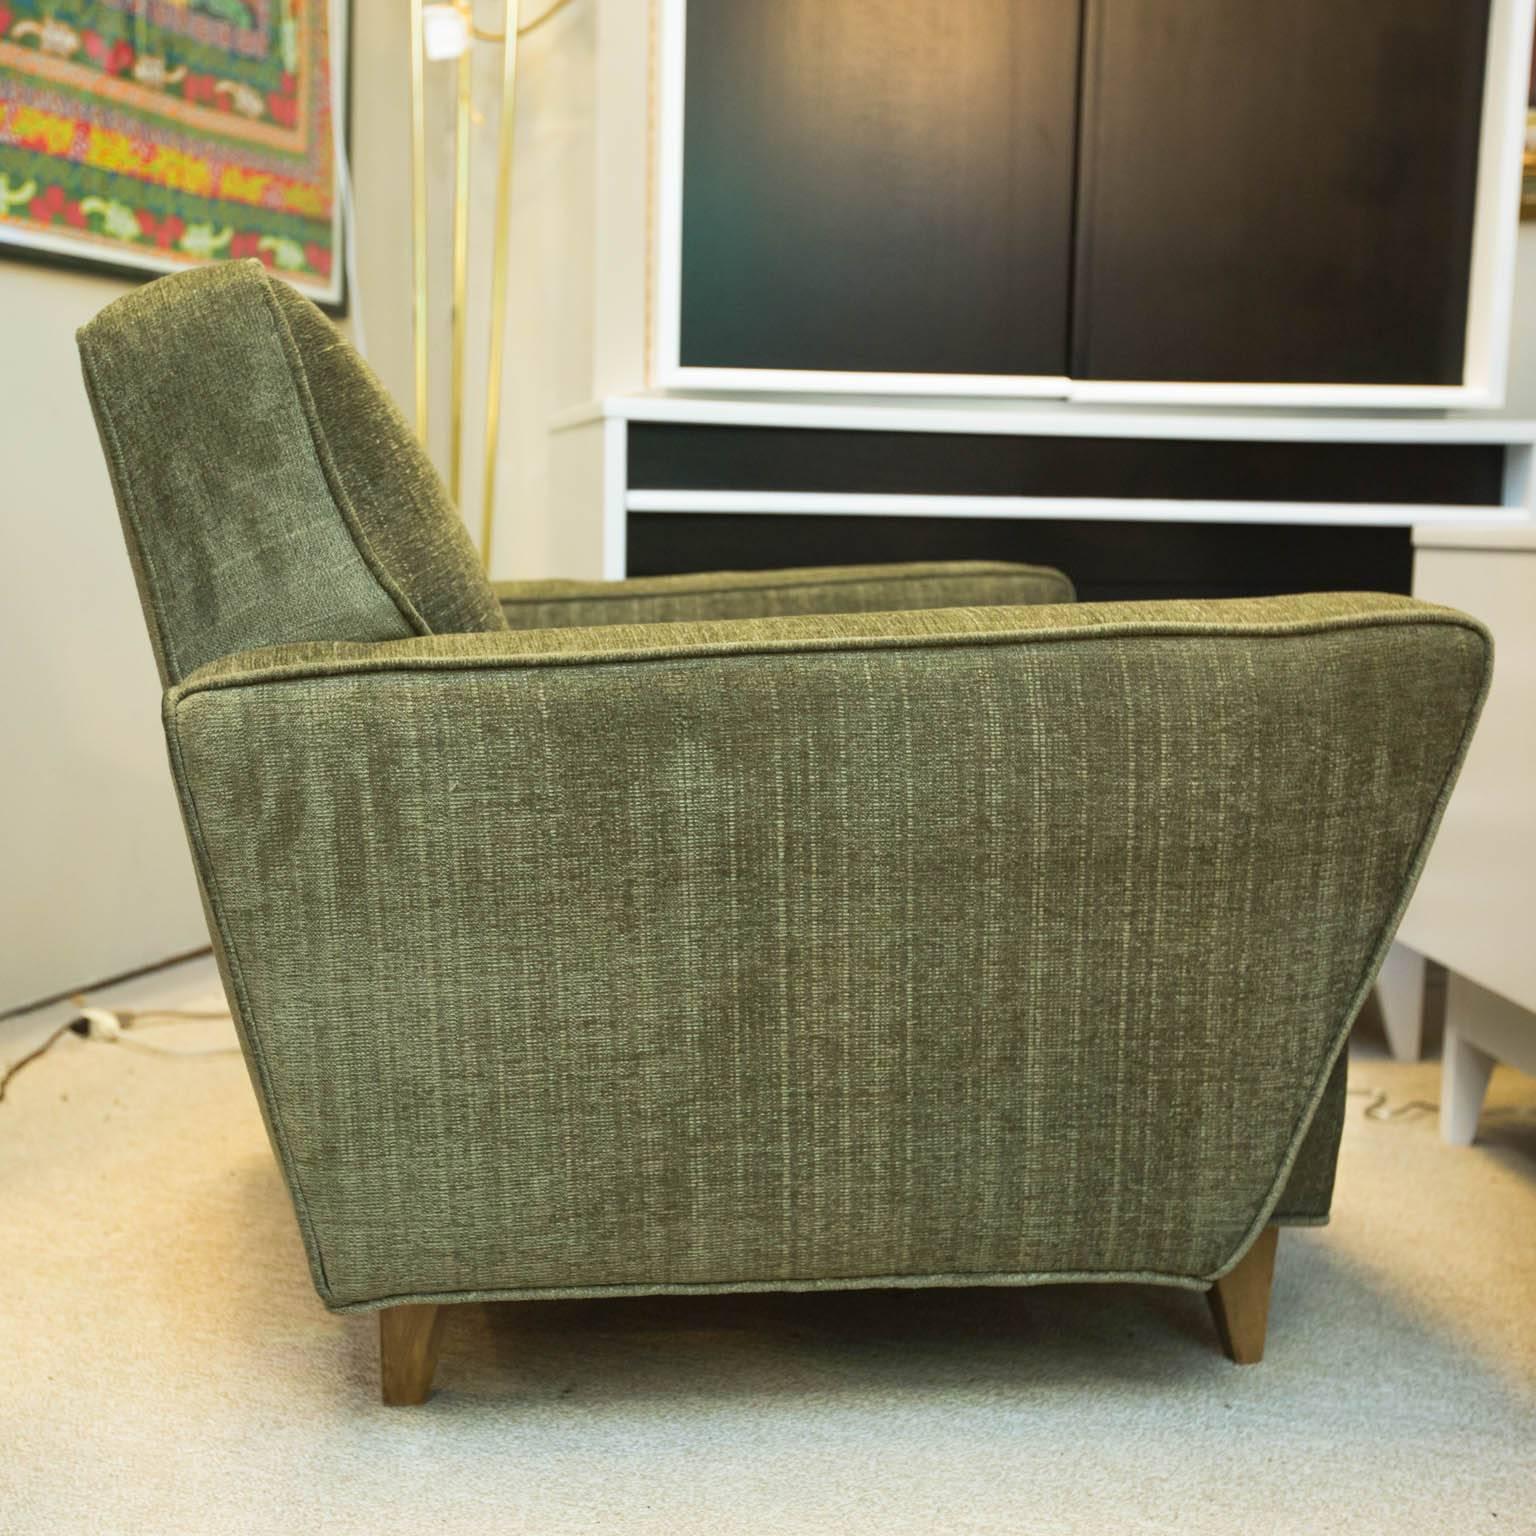 Classic late 1950s-early 1960s lounge chair professionally reupholstered in a light sage green velvet with blonde mahogany legs.